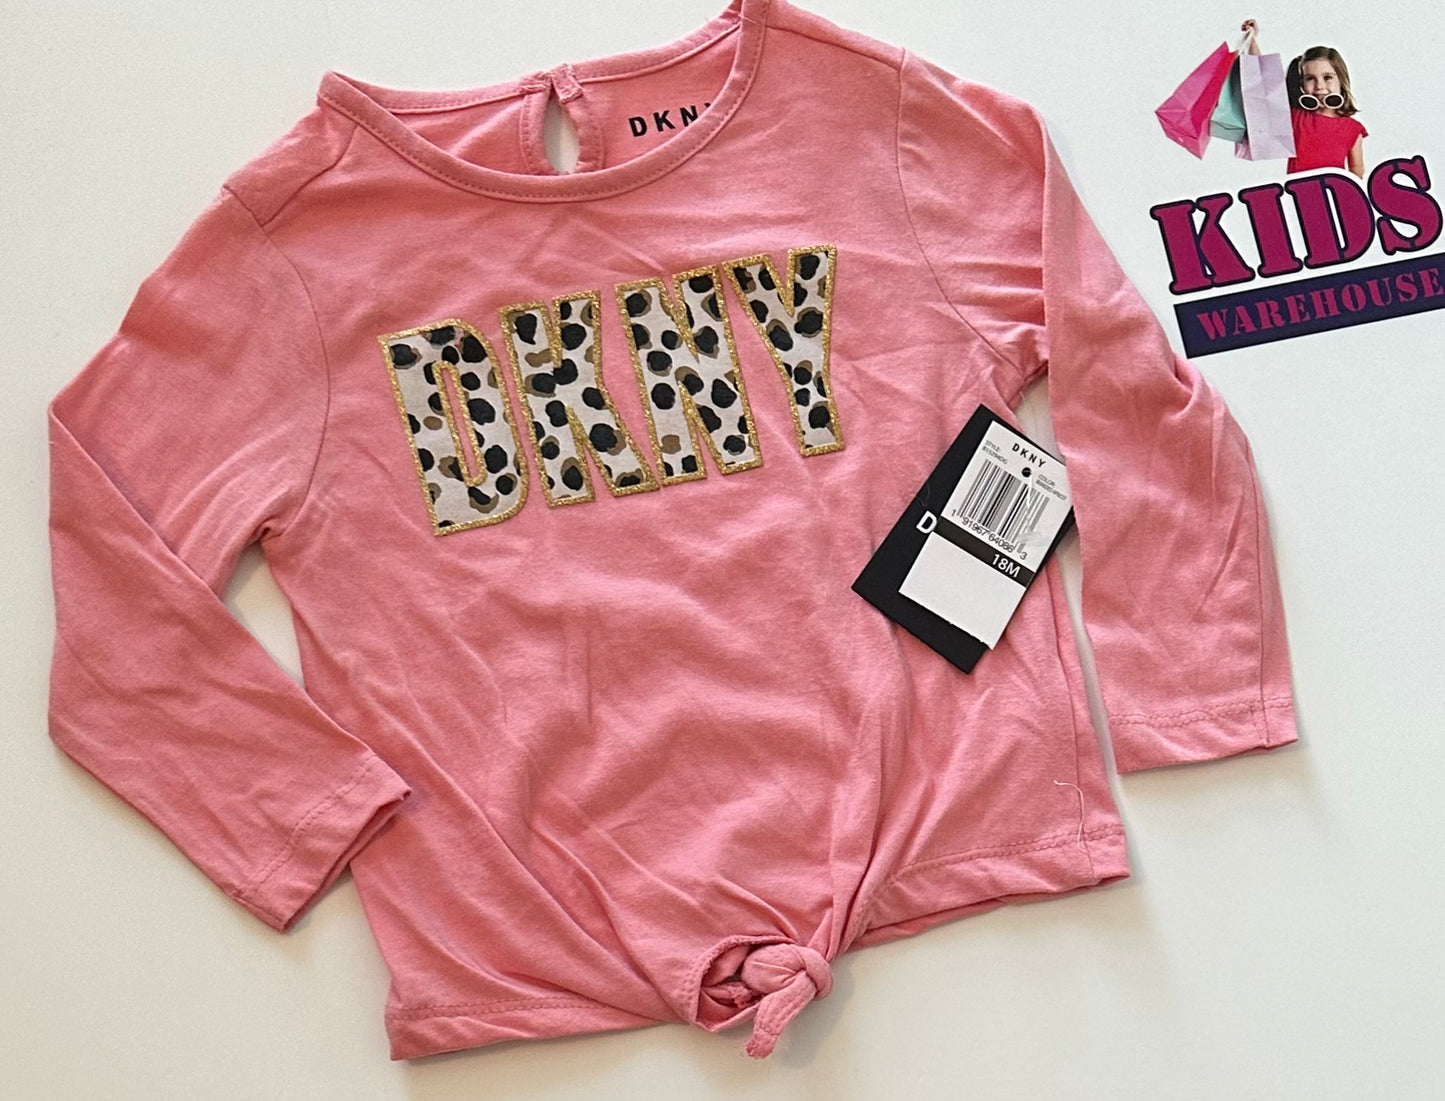 New DKNY Pink Leopard Top Size 1